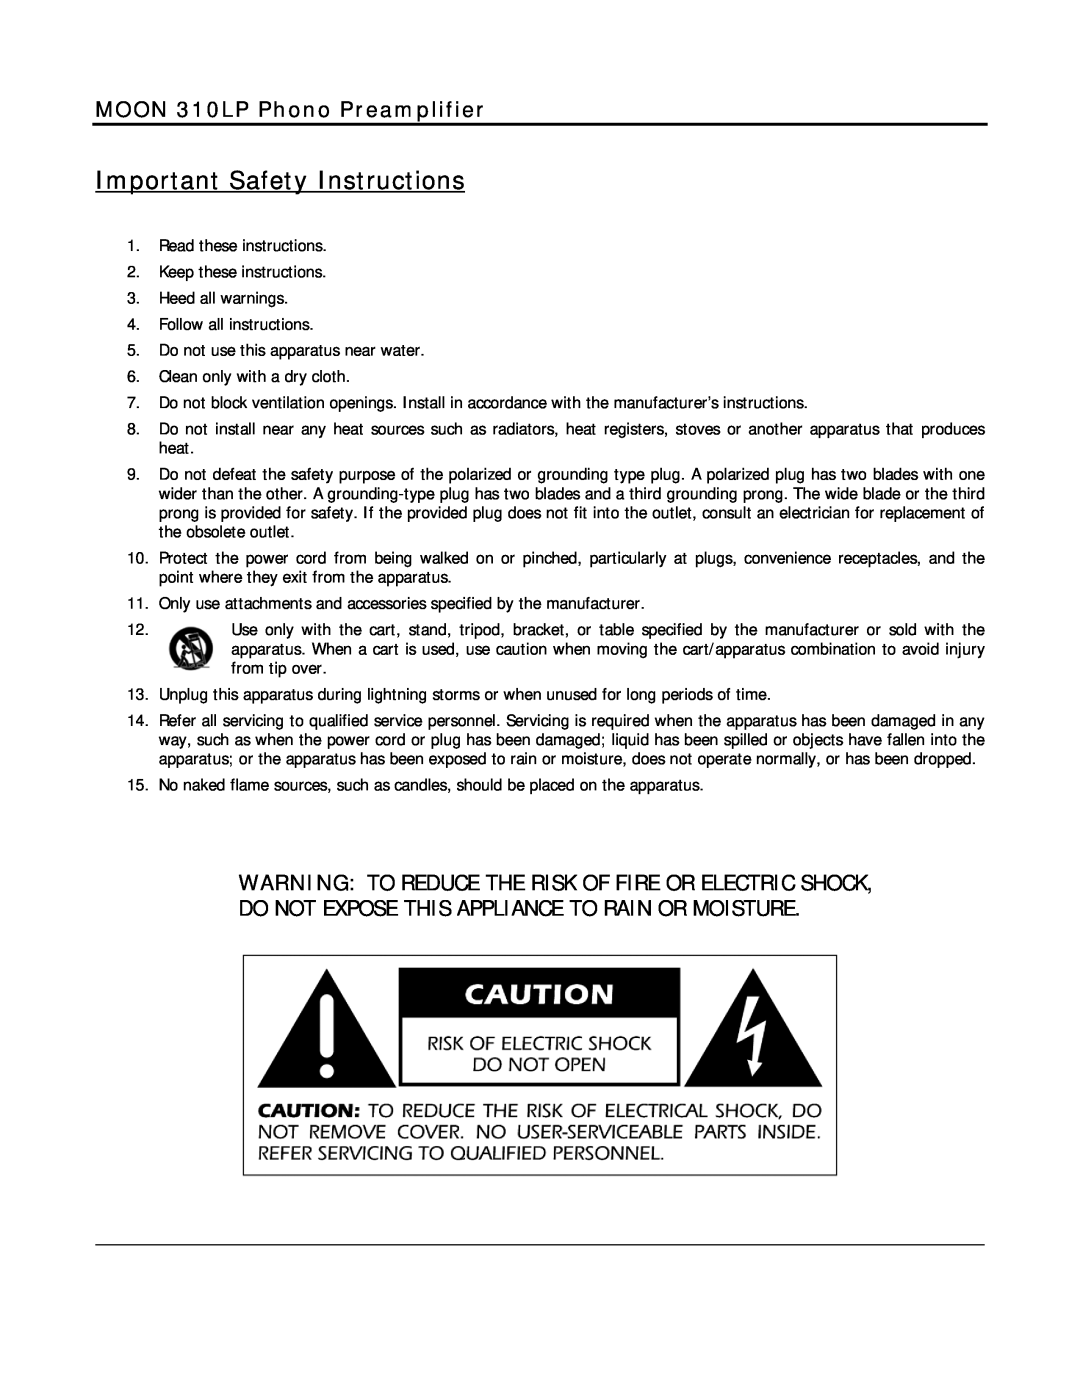 Simaudio 310 LP owner manual Important Safety Instructions, MOON 310LP Phono Preamplifier 